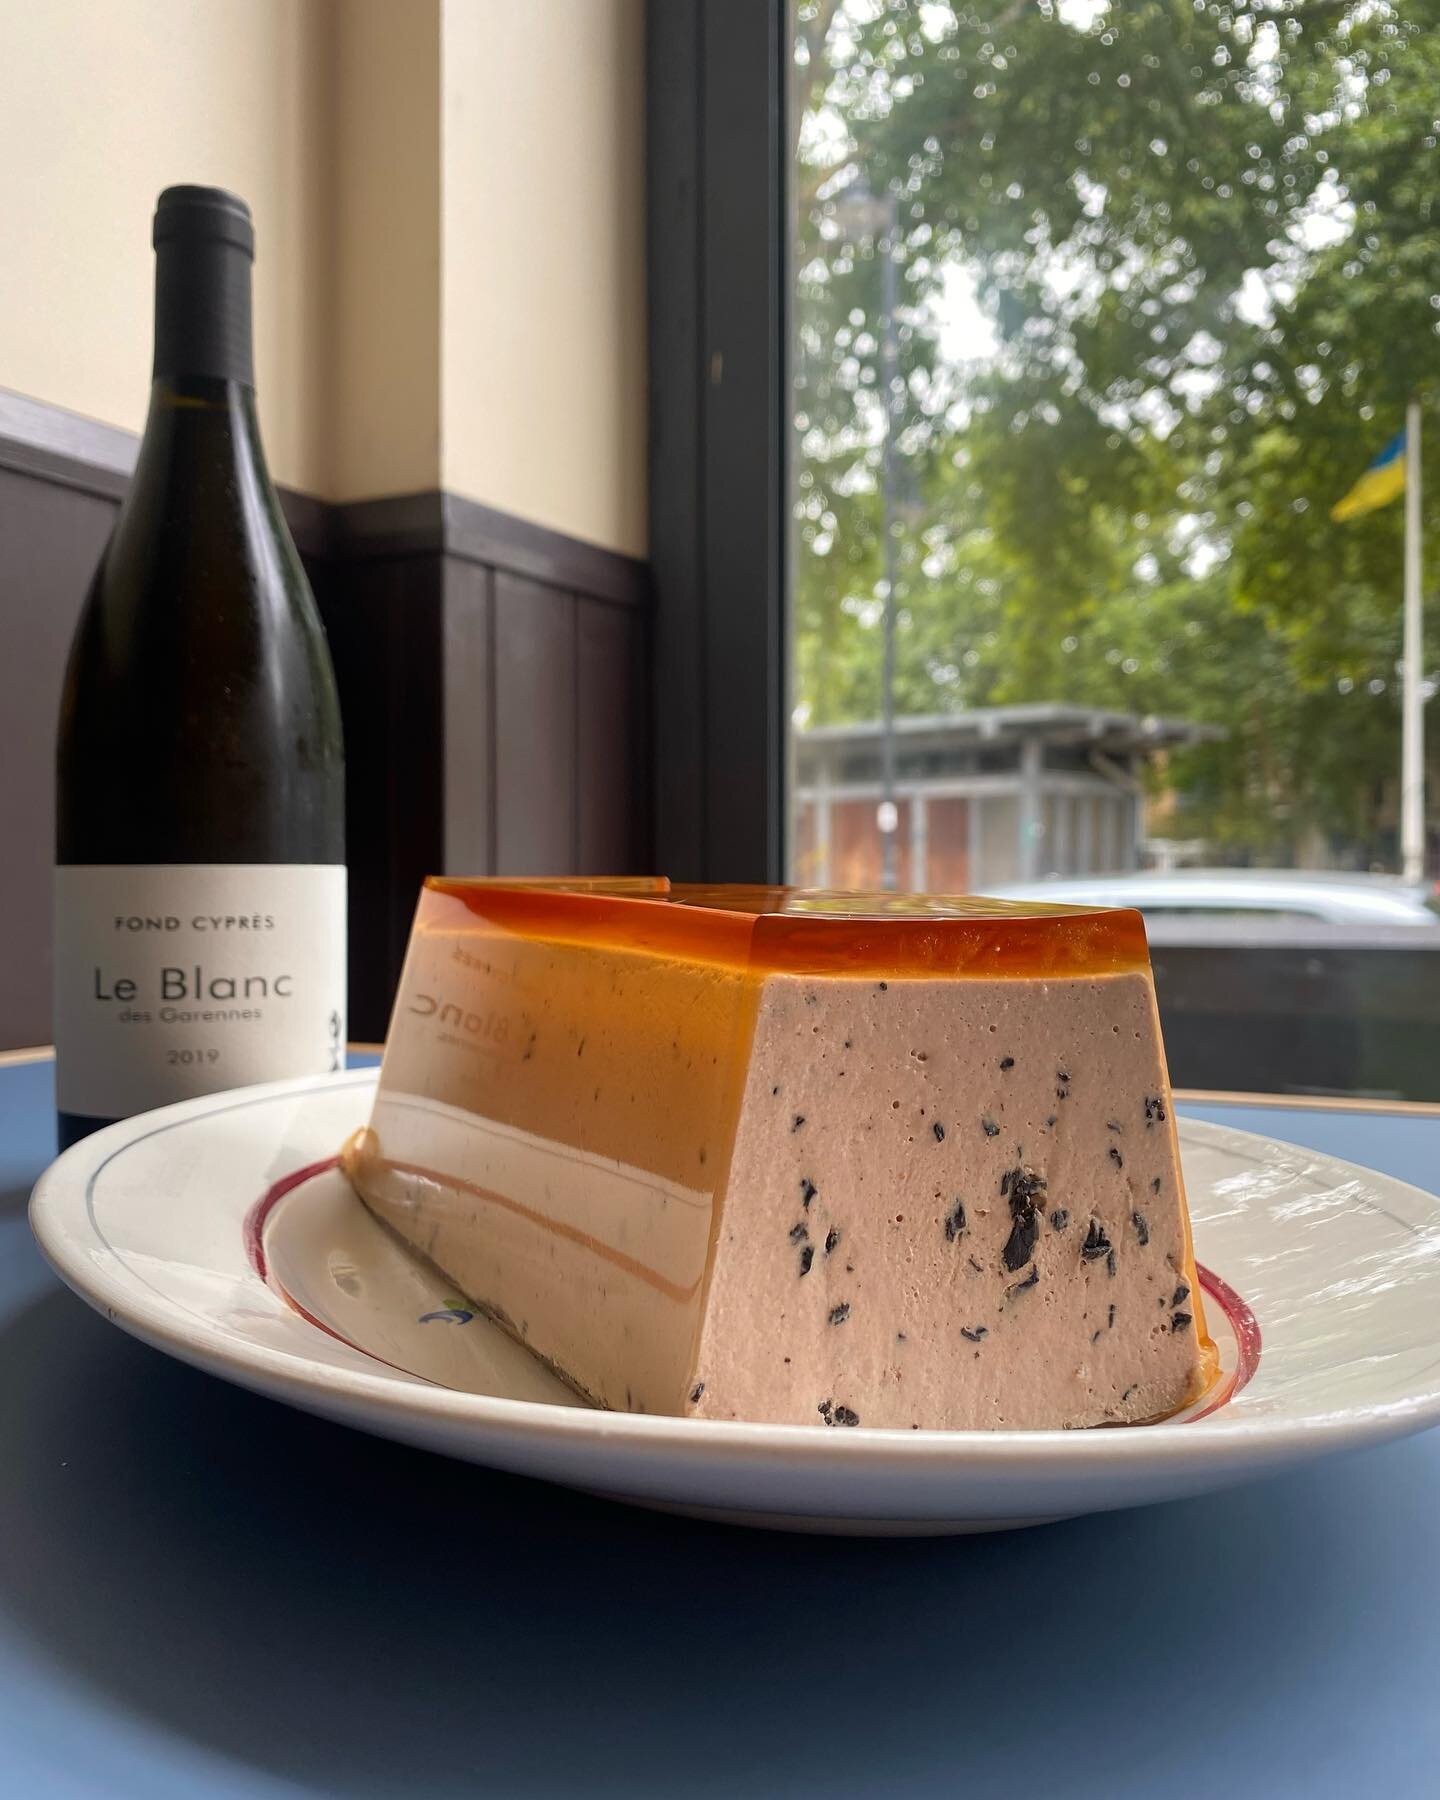 An absolute whirlwind of a first week, and we&rsquo;re going out with a bang&hellip; 
Today the bar will be open from 12pm - 10.30pm, lunch will be served from 12pm - 3pm and dinner from 6pm - 9.30pm. We have George&rsquo;s wonderful mousse de canard